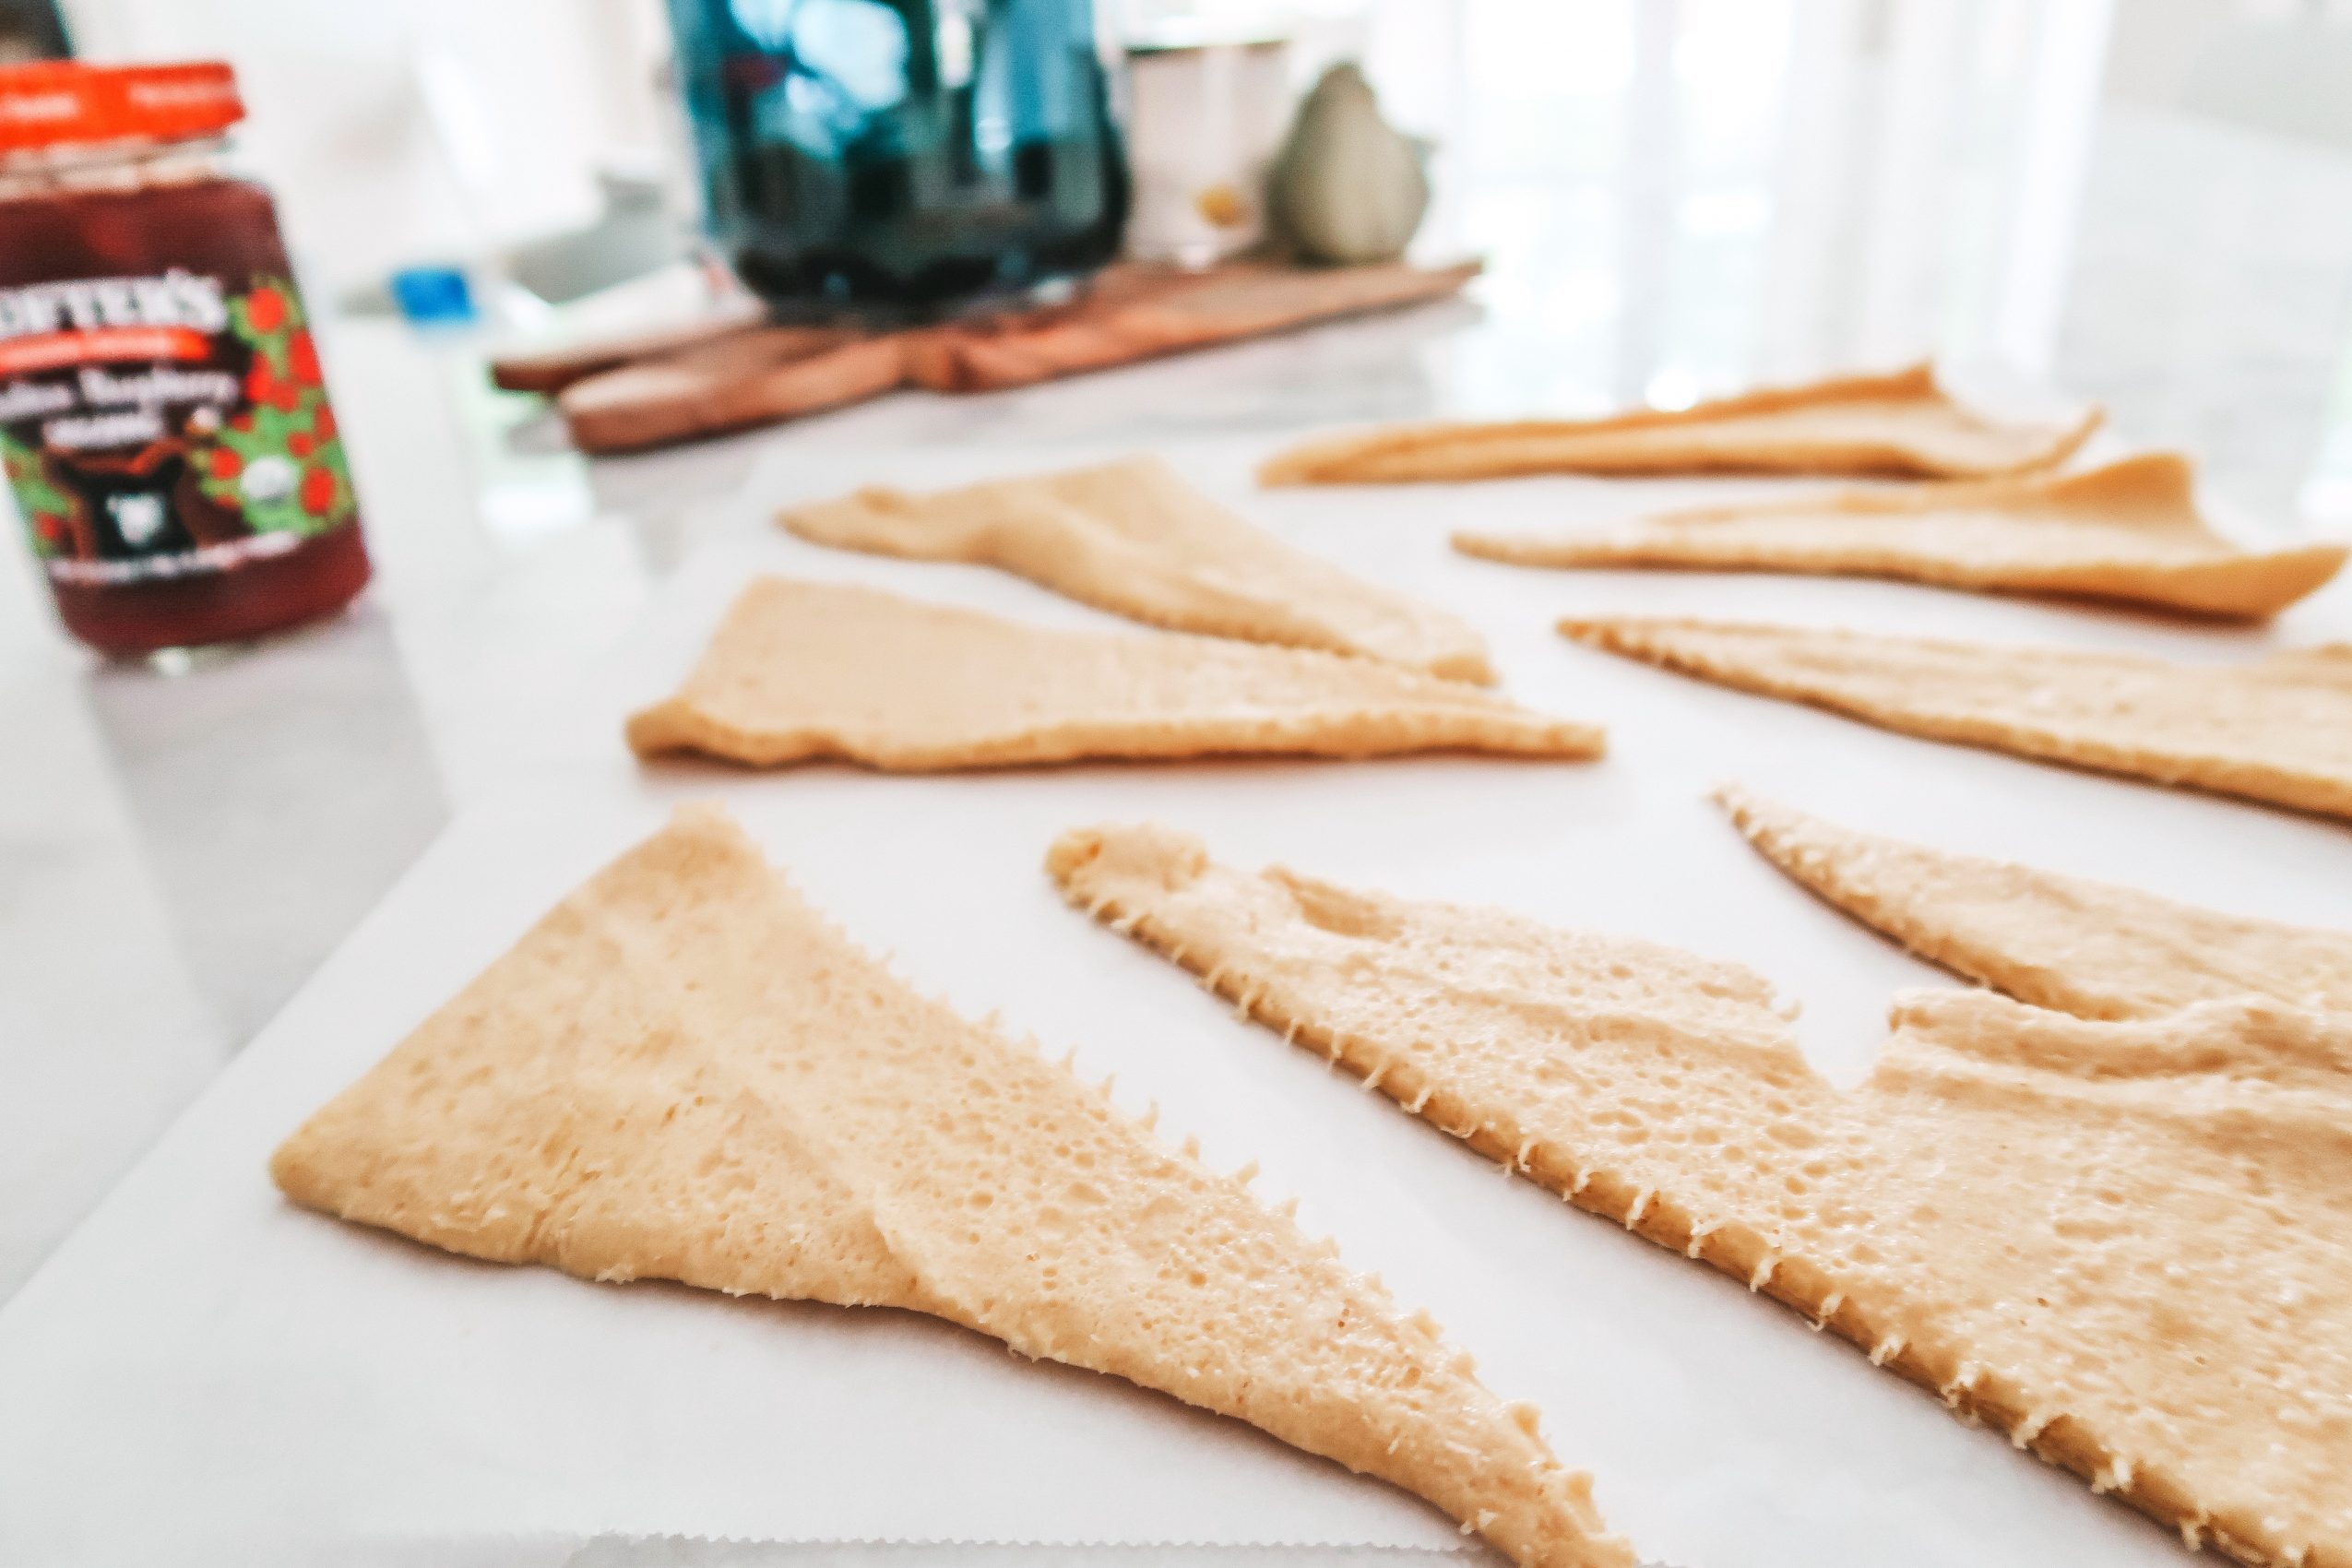 unroll the crescent rolls on a parchment lined cookie sheet